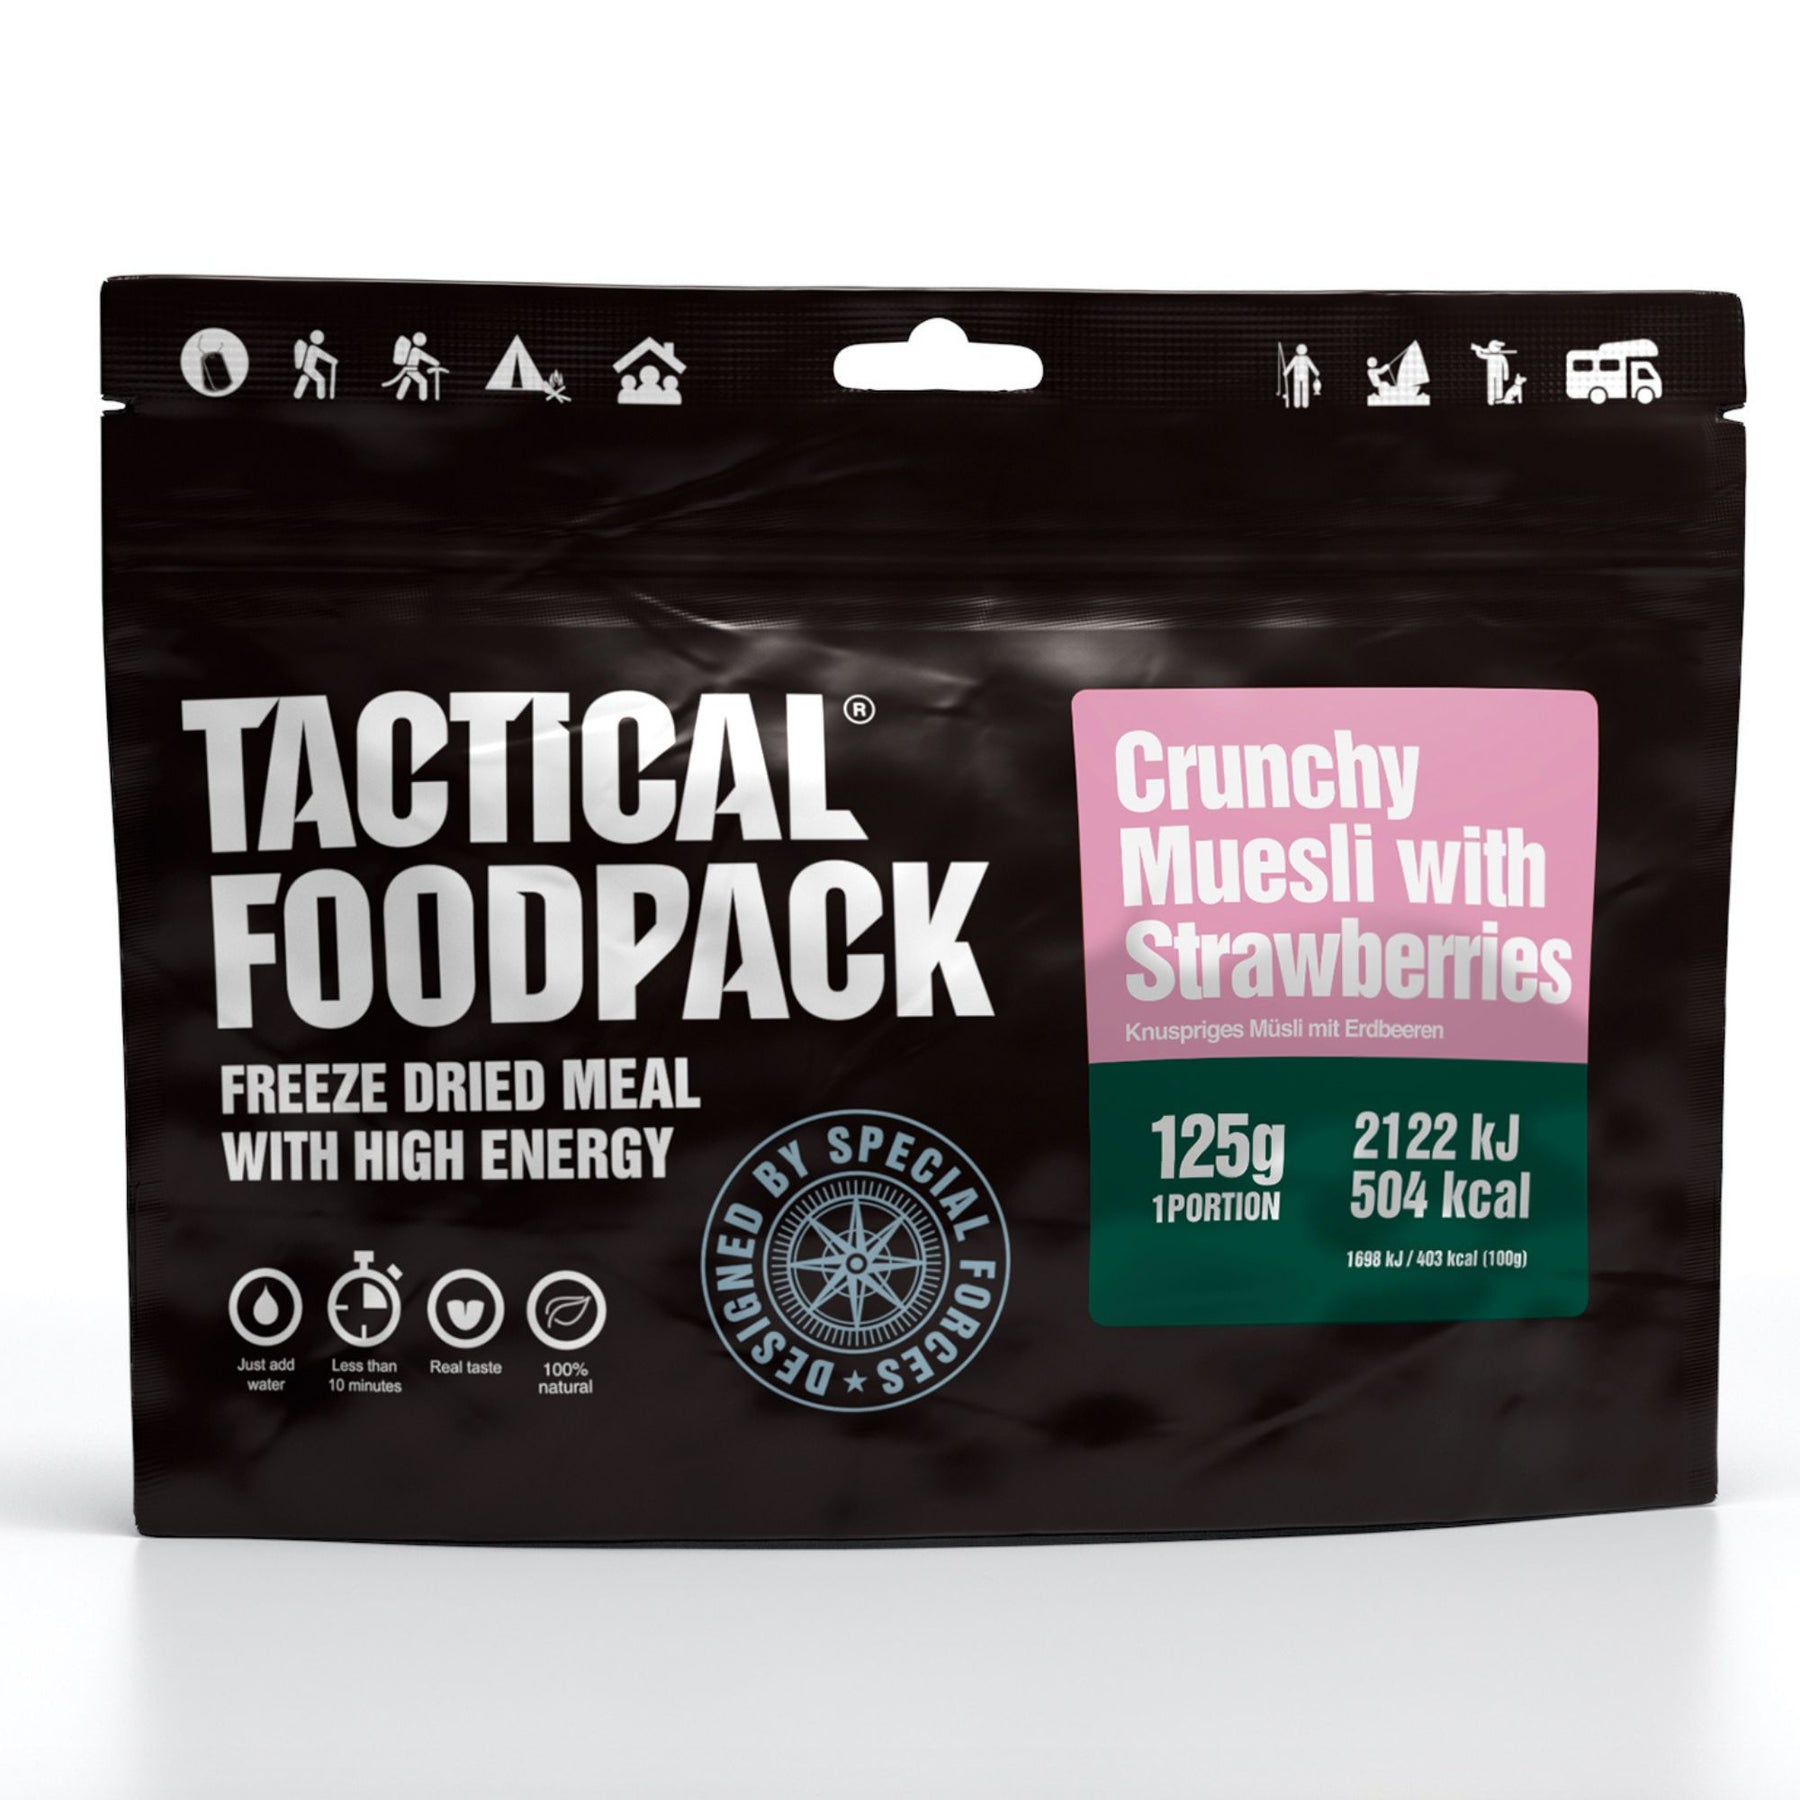 Tactical Foodpack | Crunchy Muesli with Strawberries 125g - Muesli croccante con fragole